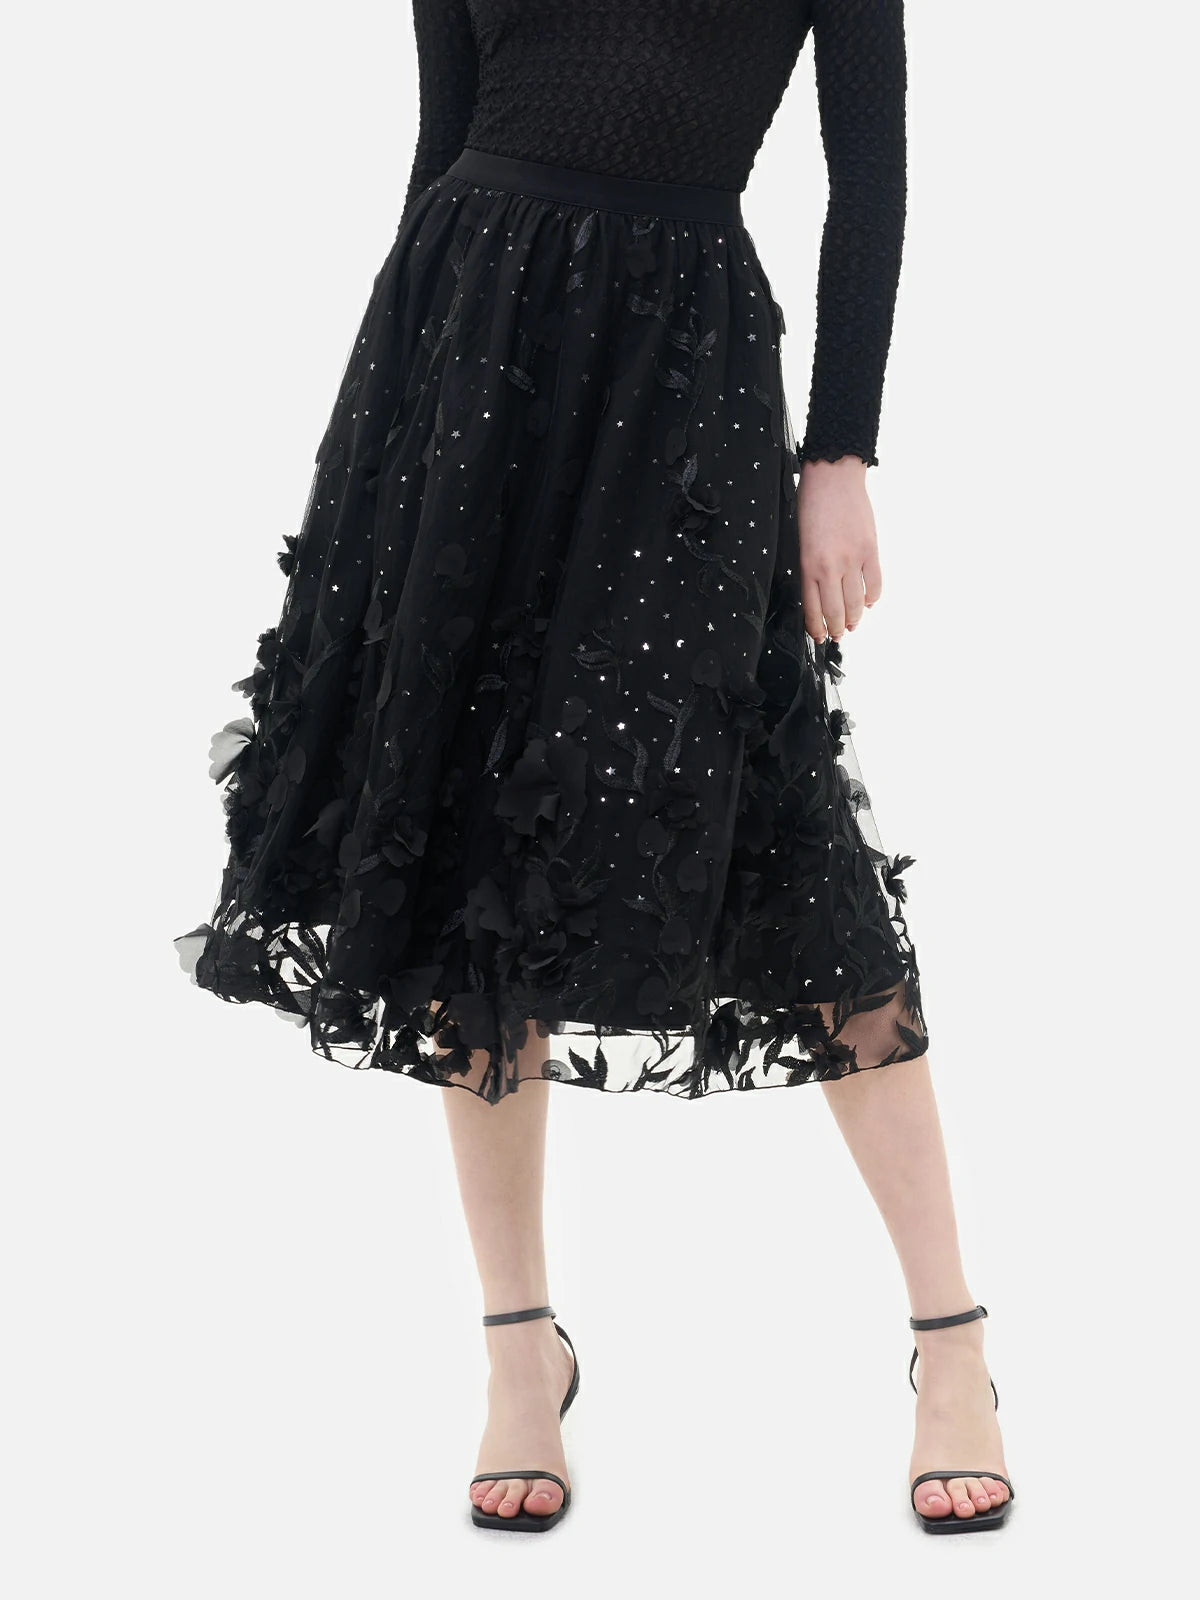 Stylish black double-layered skirt with inner lining adorned with star-shaped sequins, perfect for a glamorous look.